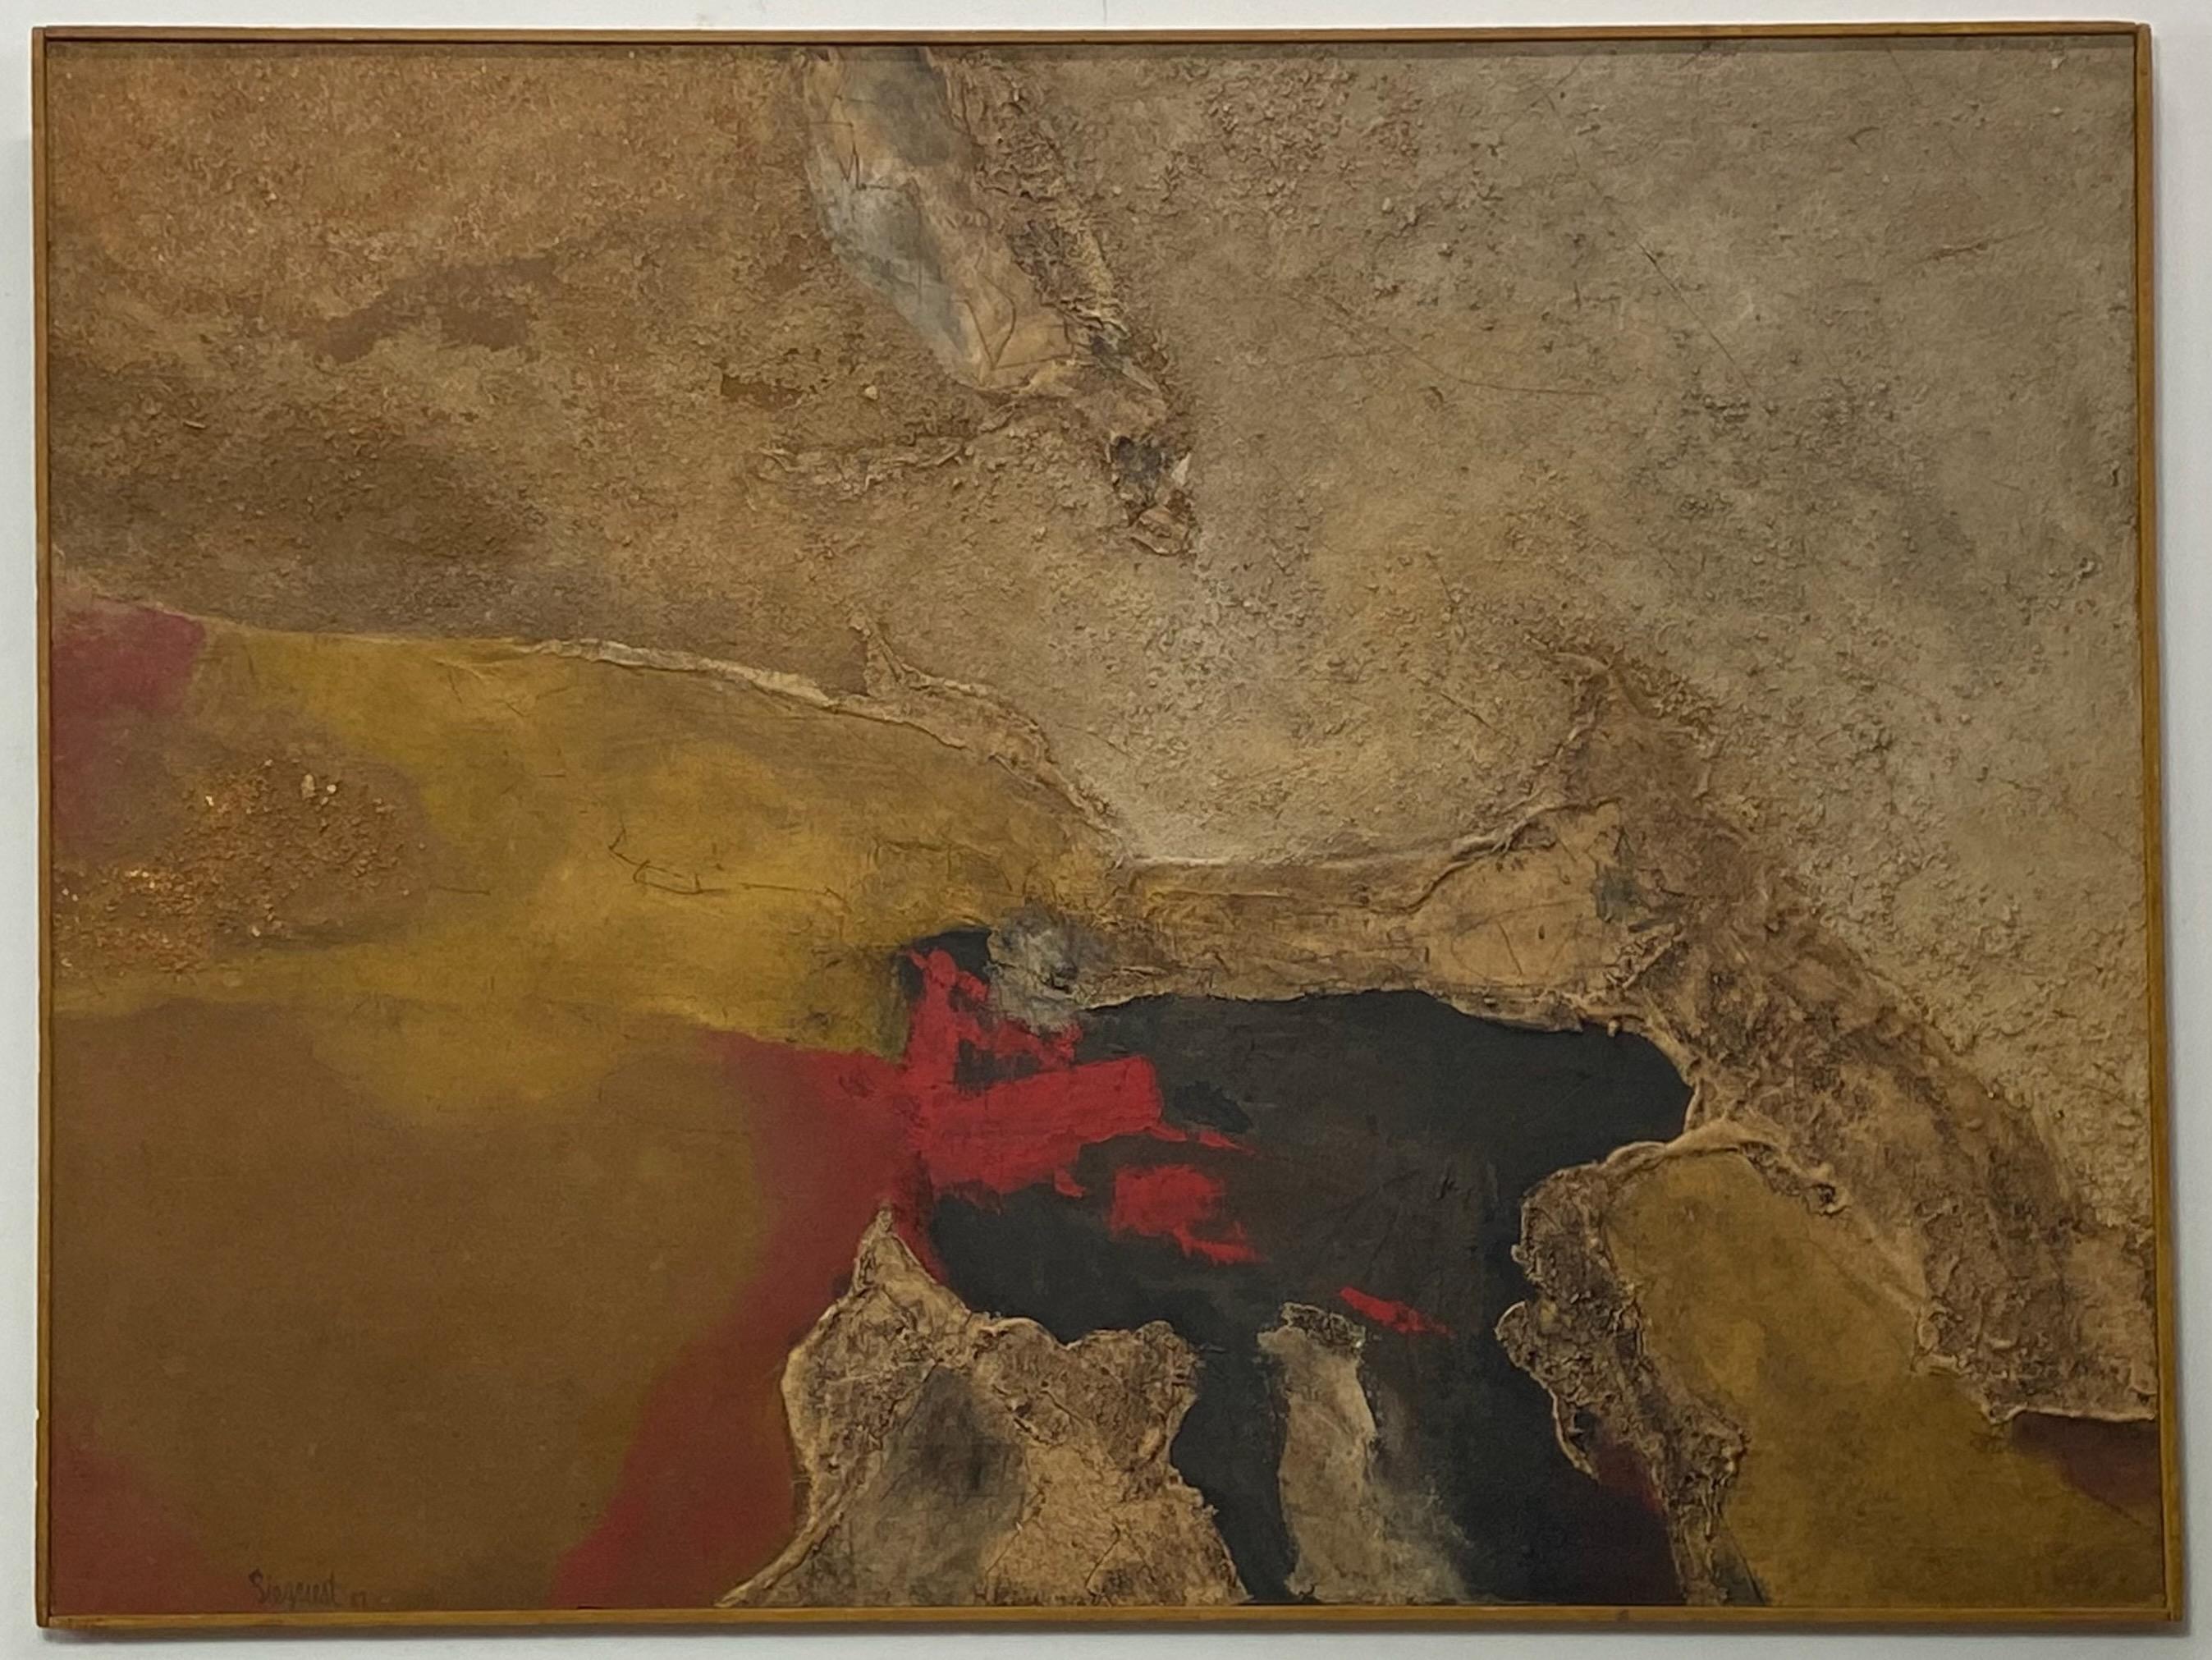 Large modern abstract expressionist painting by California Bay Area artist Louis Siegriest (born 1899 - died 1989).
Oil on board, titled Fire Mountain and dated 1962.

Siegriest established a studio in Oakland, California, where he was a member